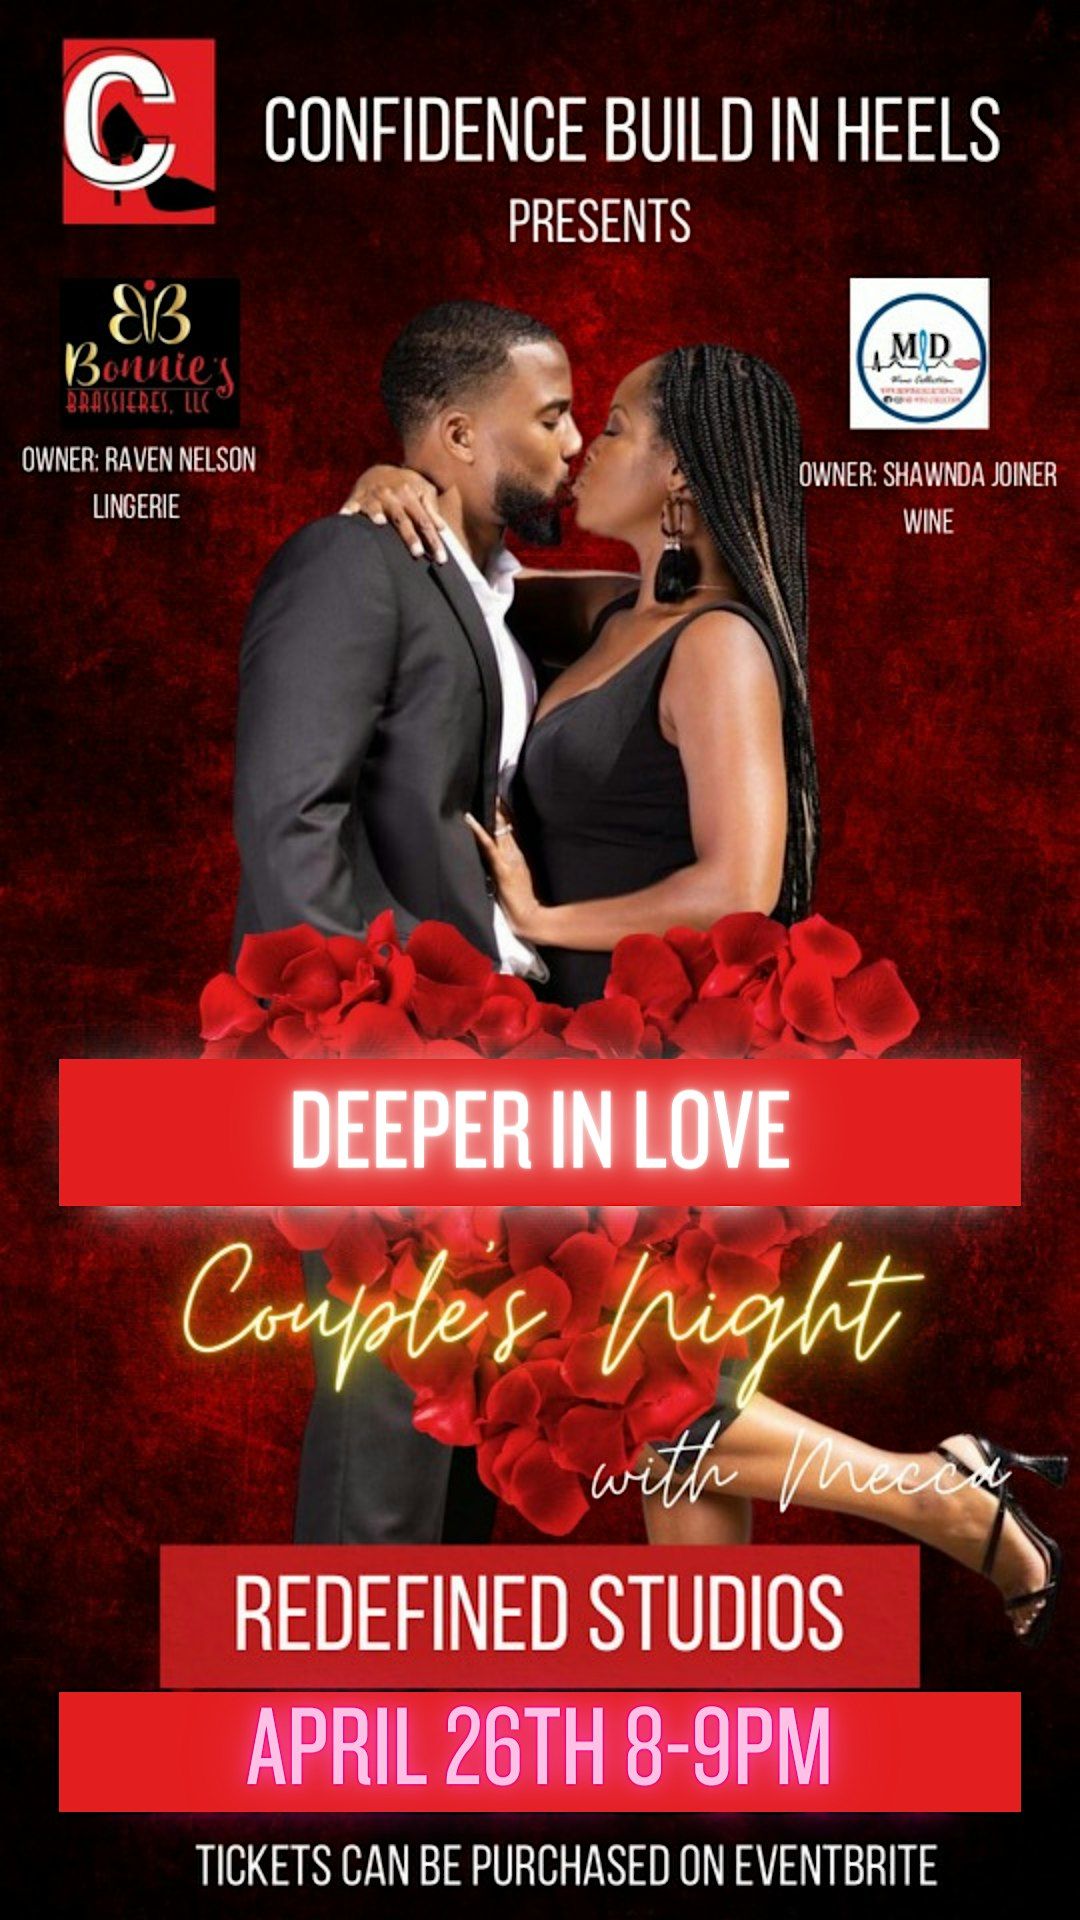 Deeper In Love "Couples Night"